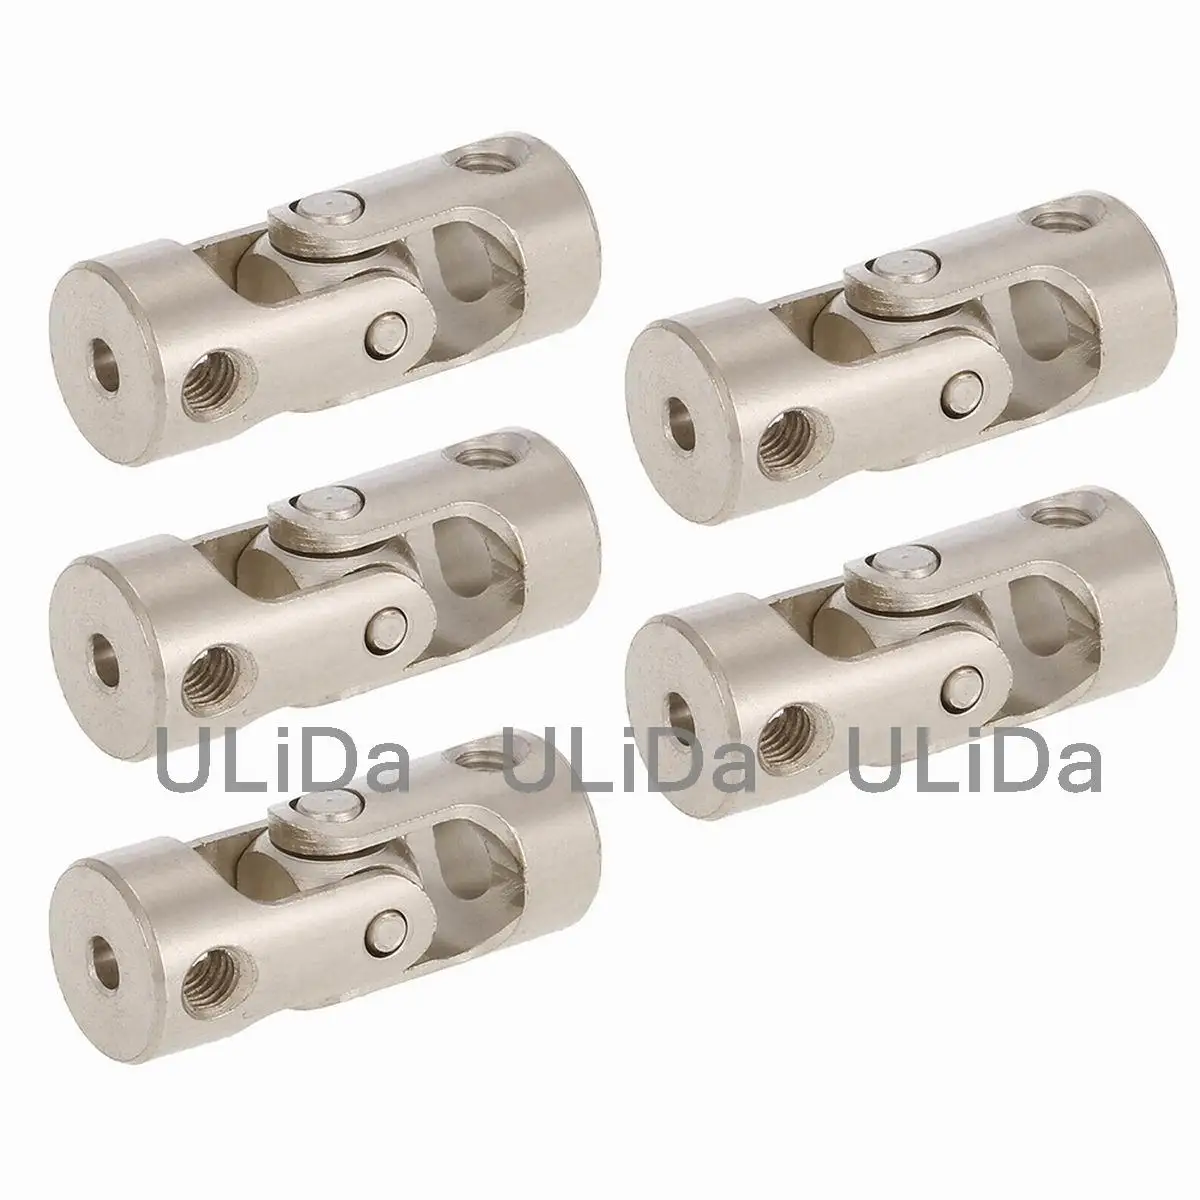 5Pcs Stainless Steel 6mm Full Metal Universal Joint Cardan Couplings For RC Car 